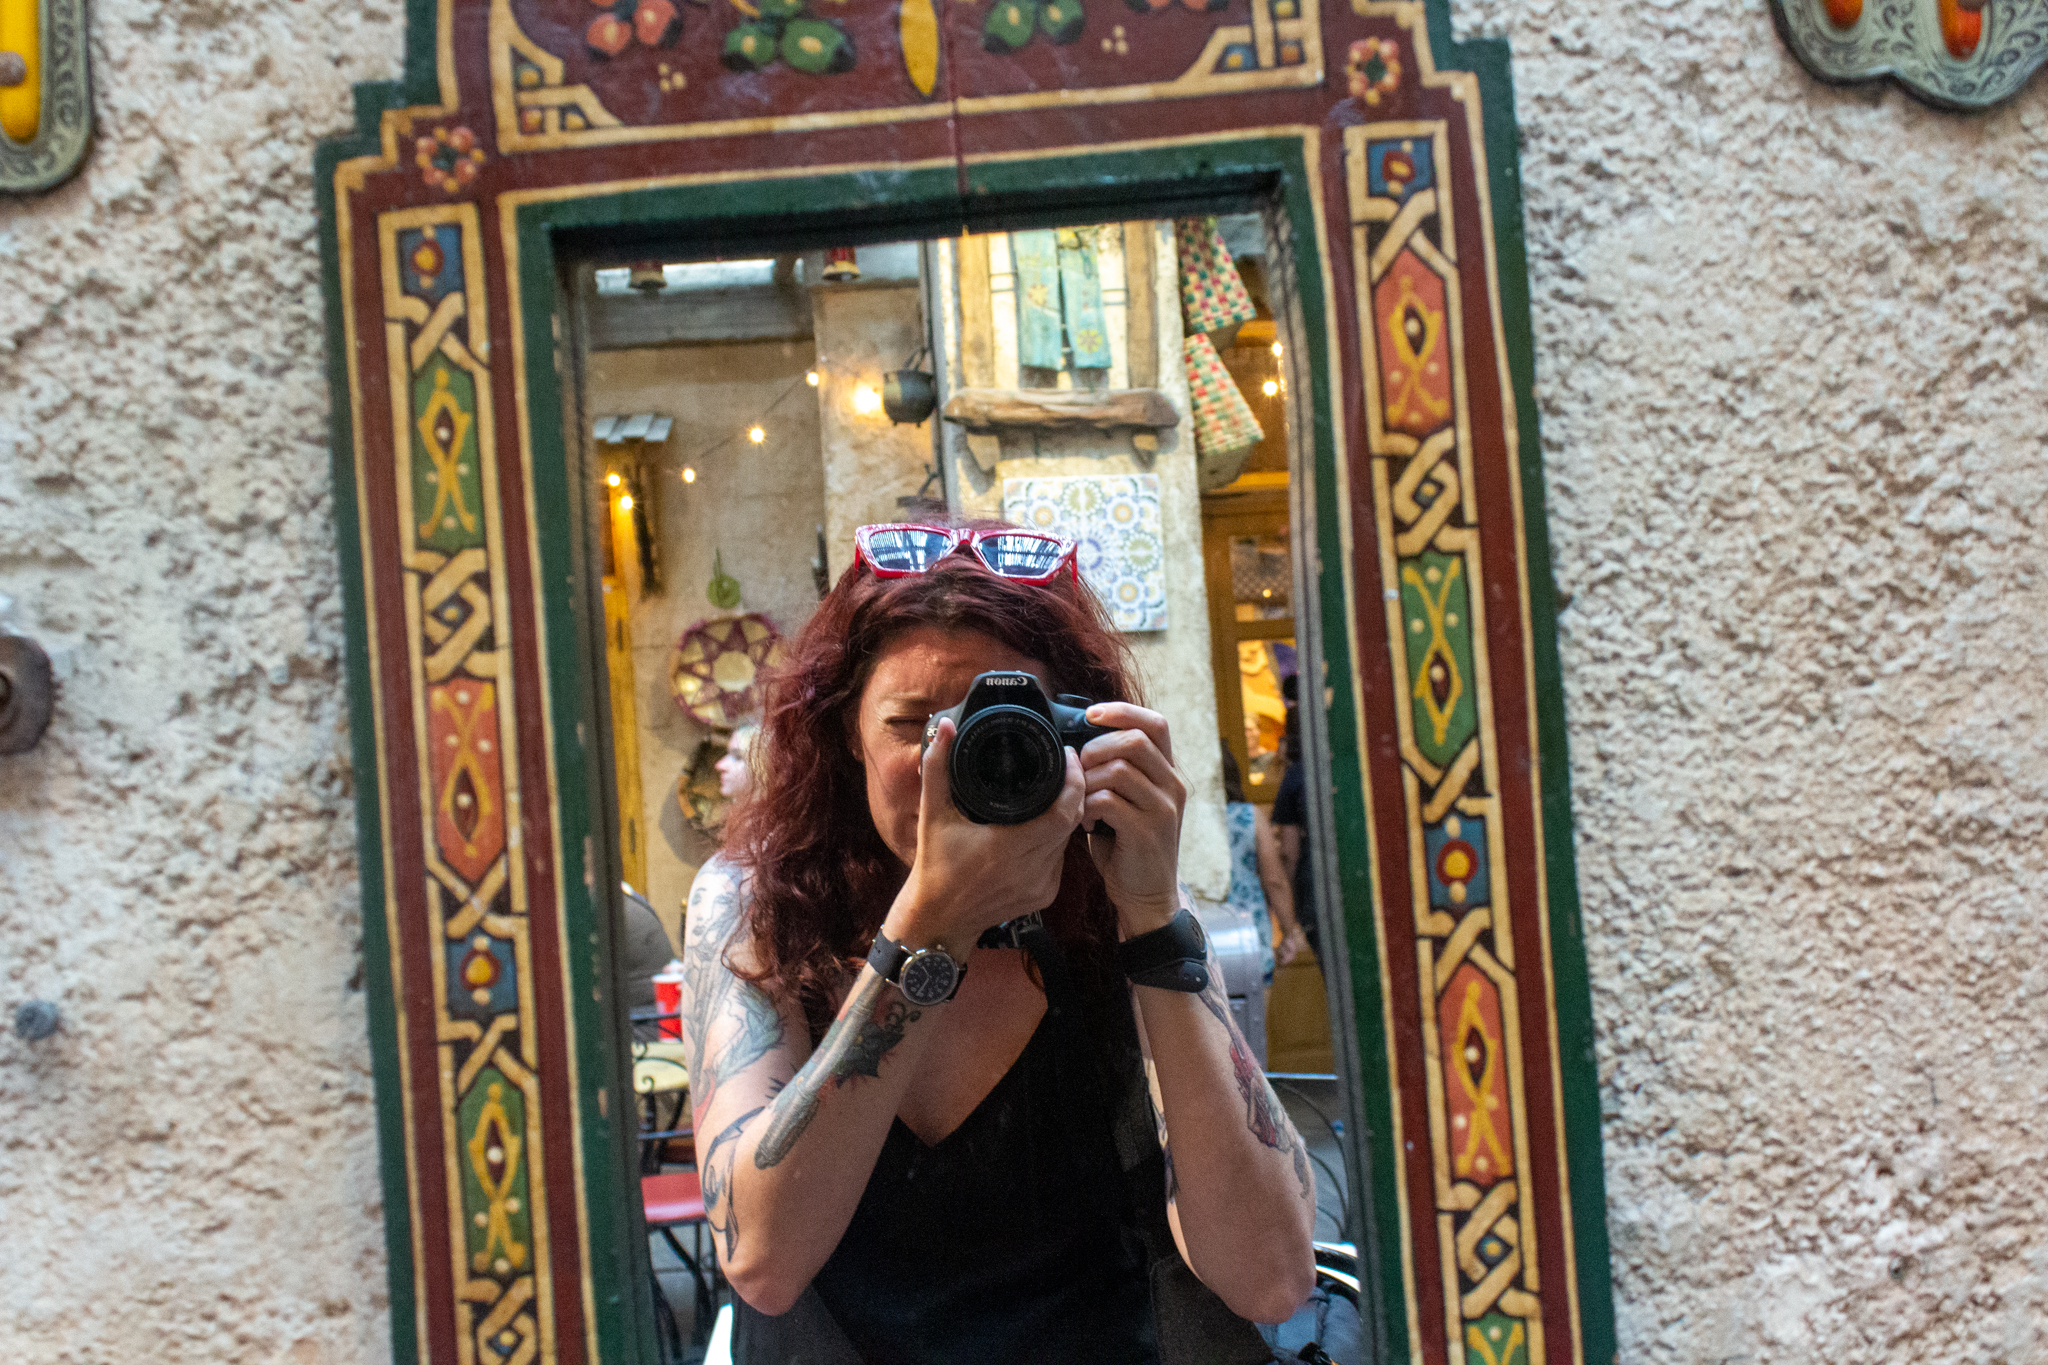 The image of a white woman with long reddish wavy hair holding a camera to her eye as captured in a tall mirror edged with colorful designs